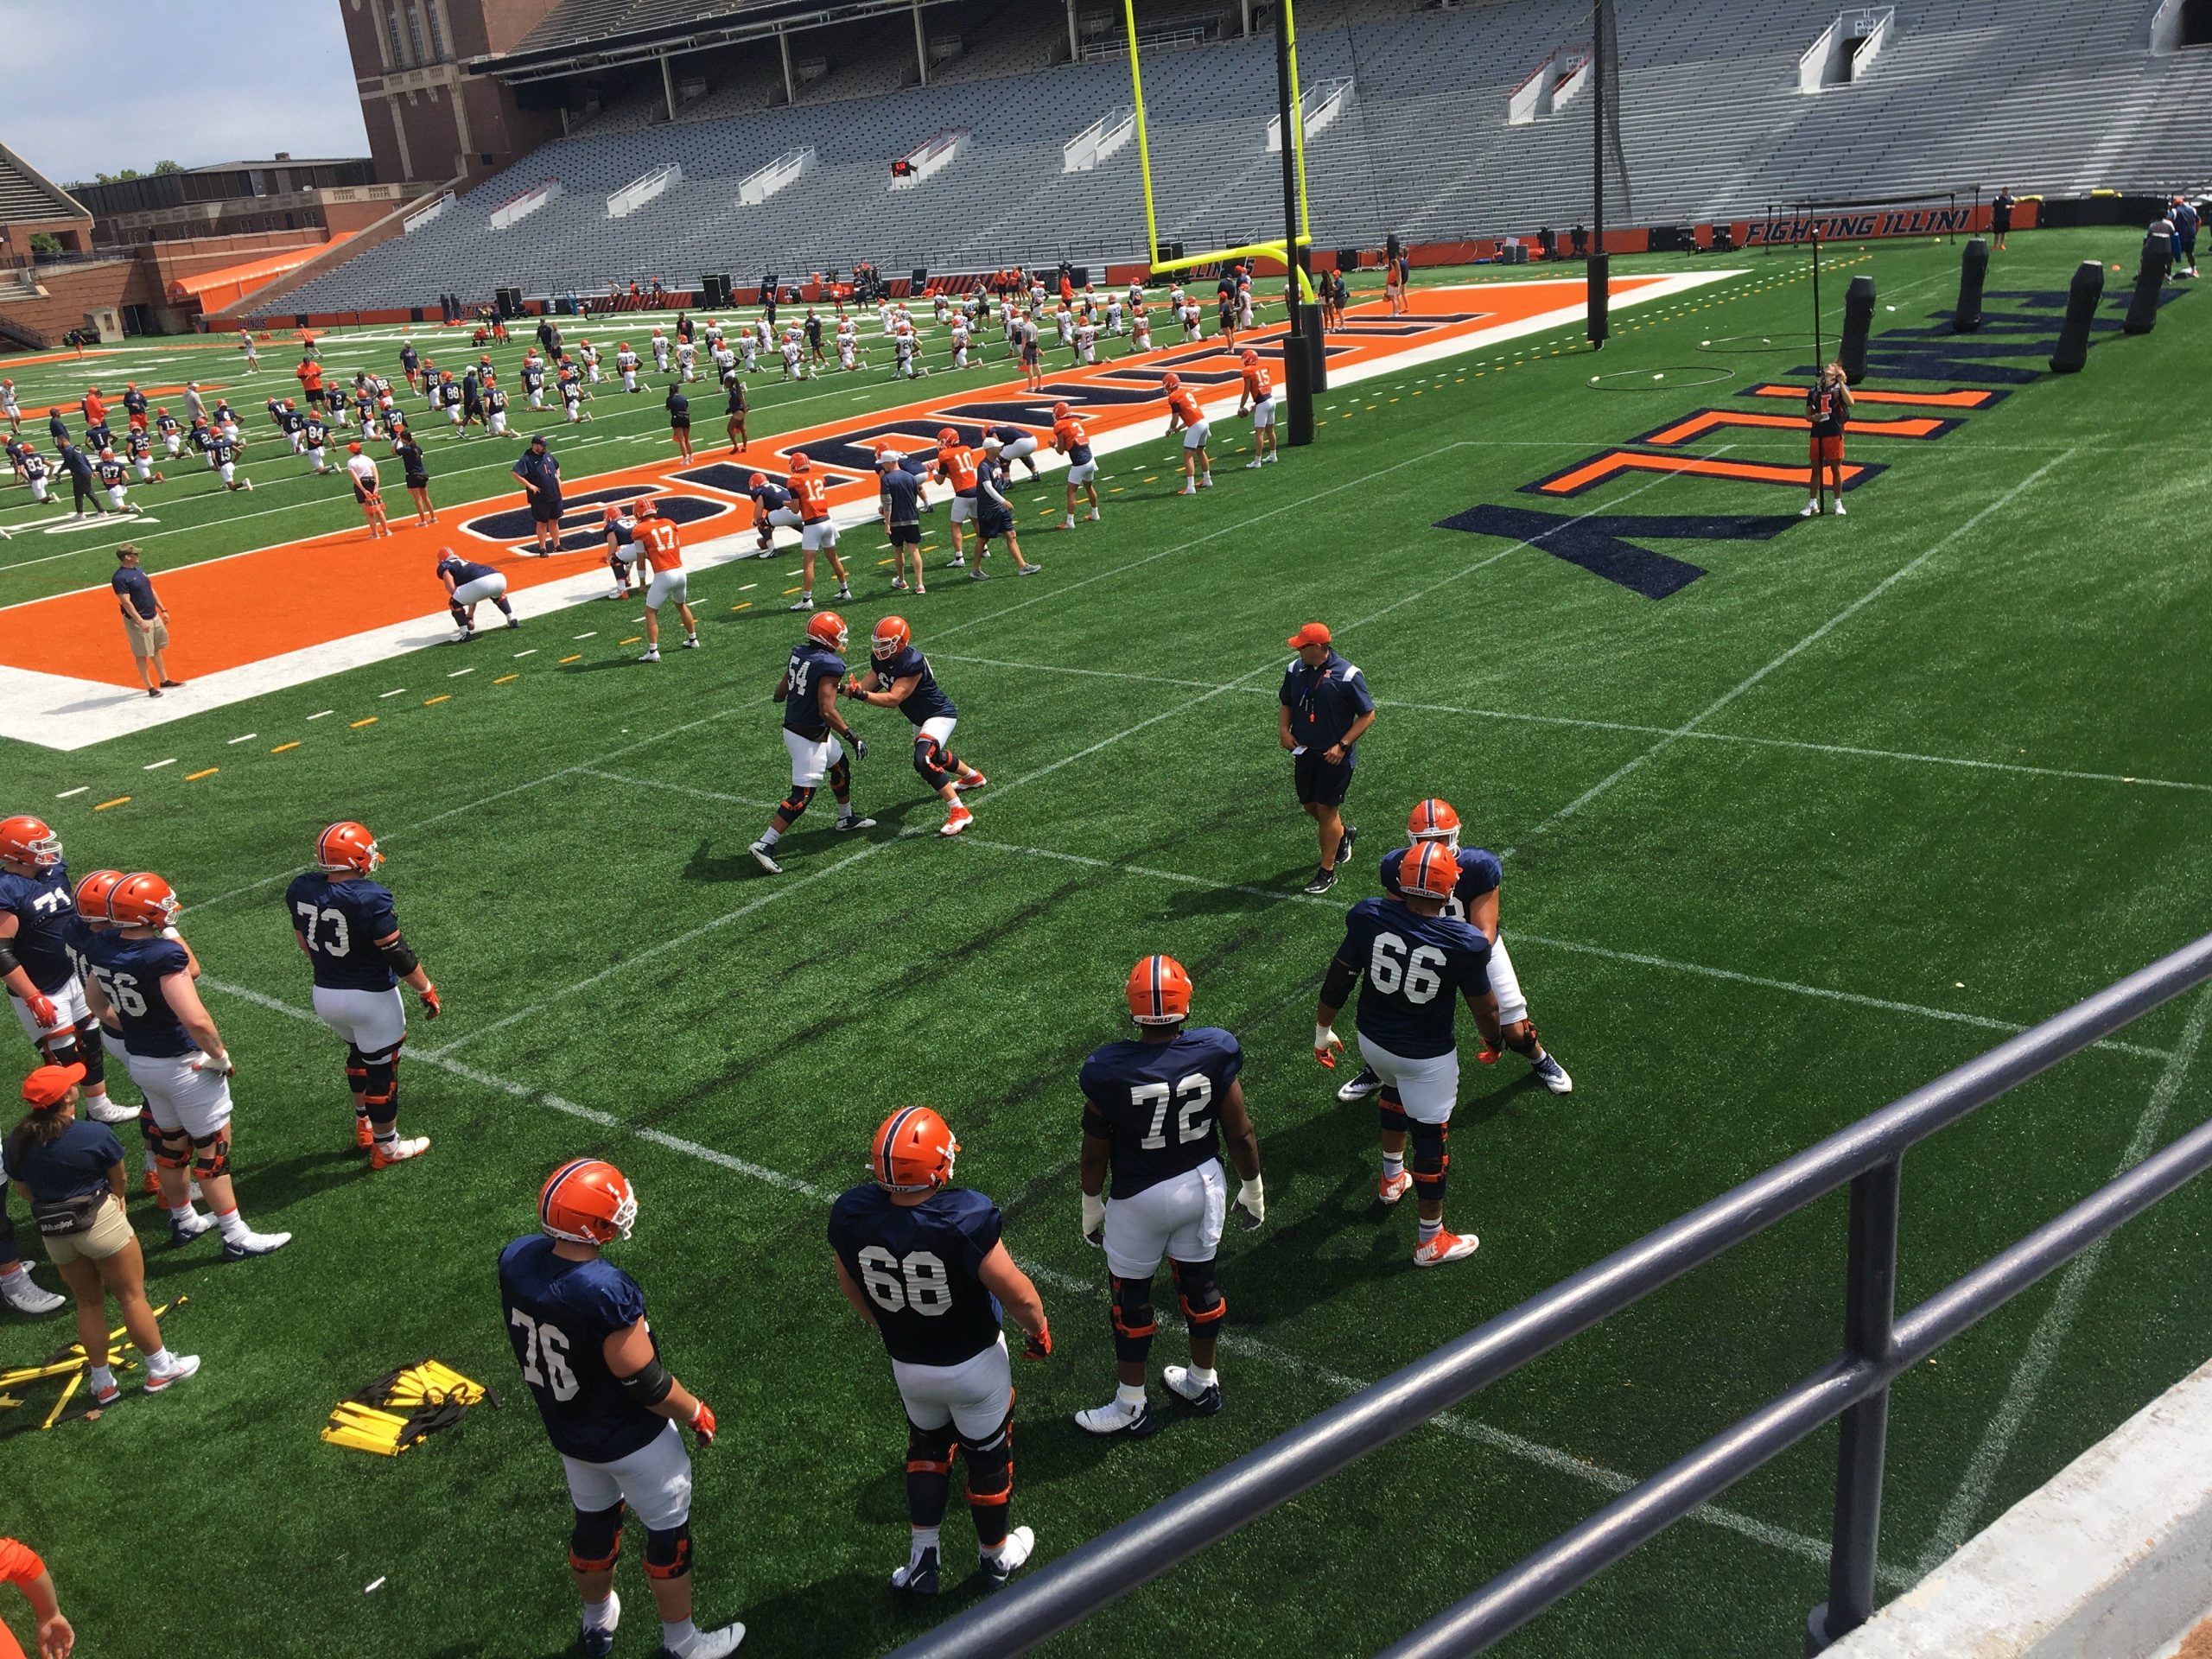 Illini Football 2022 Fall Camp Practice Report #2 (Practice No. 3) - First Day In Shoulder Pads - Aug. 1, 2022